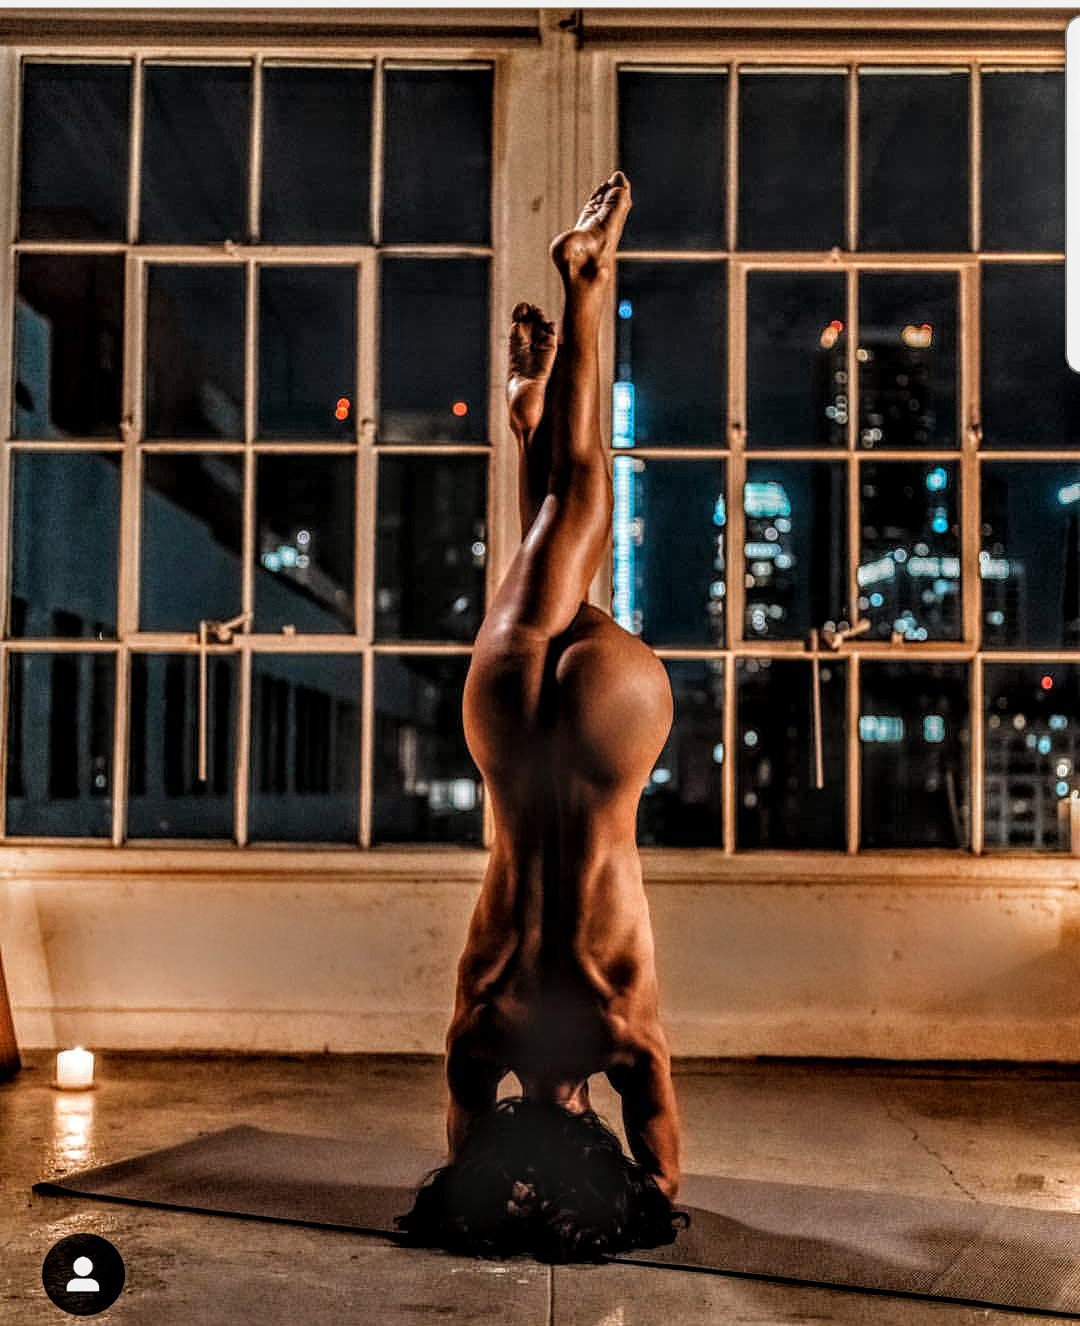 Photo by ArtOfNakedYoga with the username @ArtOfNakedYoga, who is a verified user,  February 19, 2019 at 3:37 AM. The post is about the topic Yoga in the nude and the text says '#yoga #nakedyoga #nudeyoga'